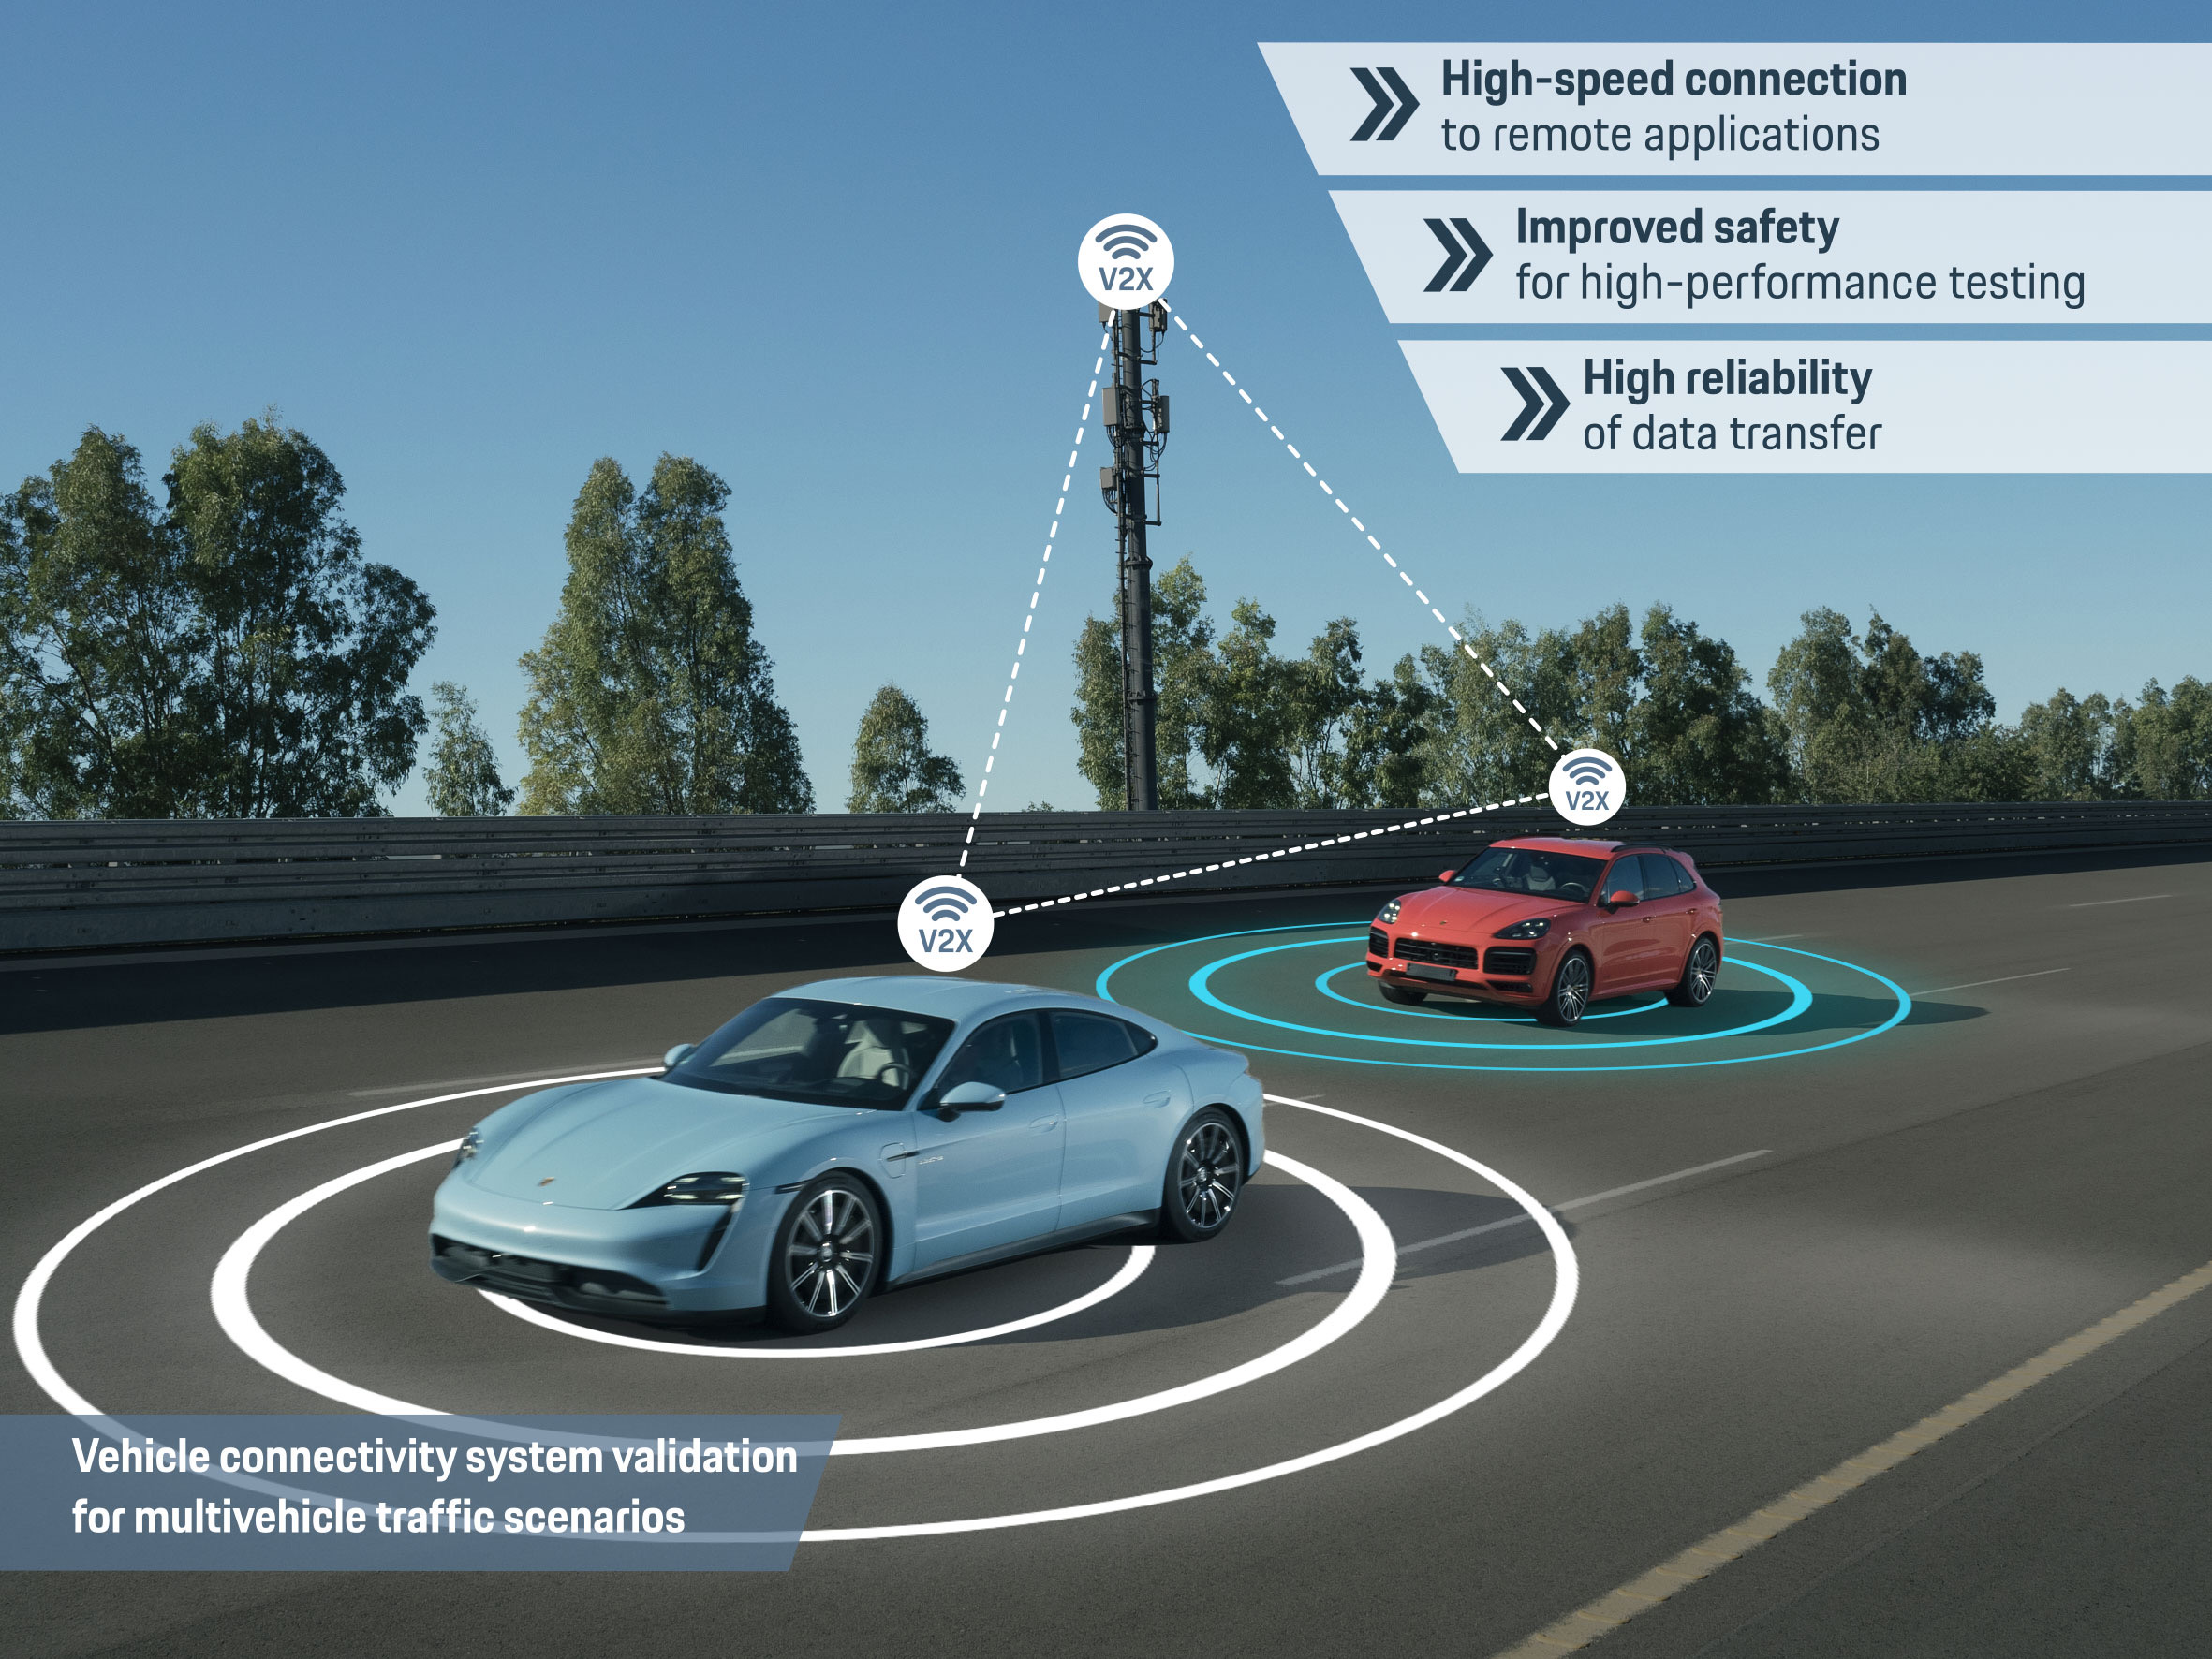 Real-time exchange of relevant data between vehicles supplied by 5G drives the validation of V2X functions